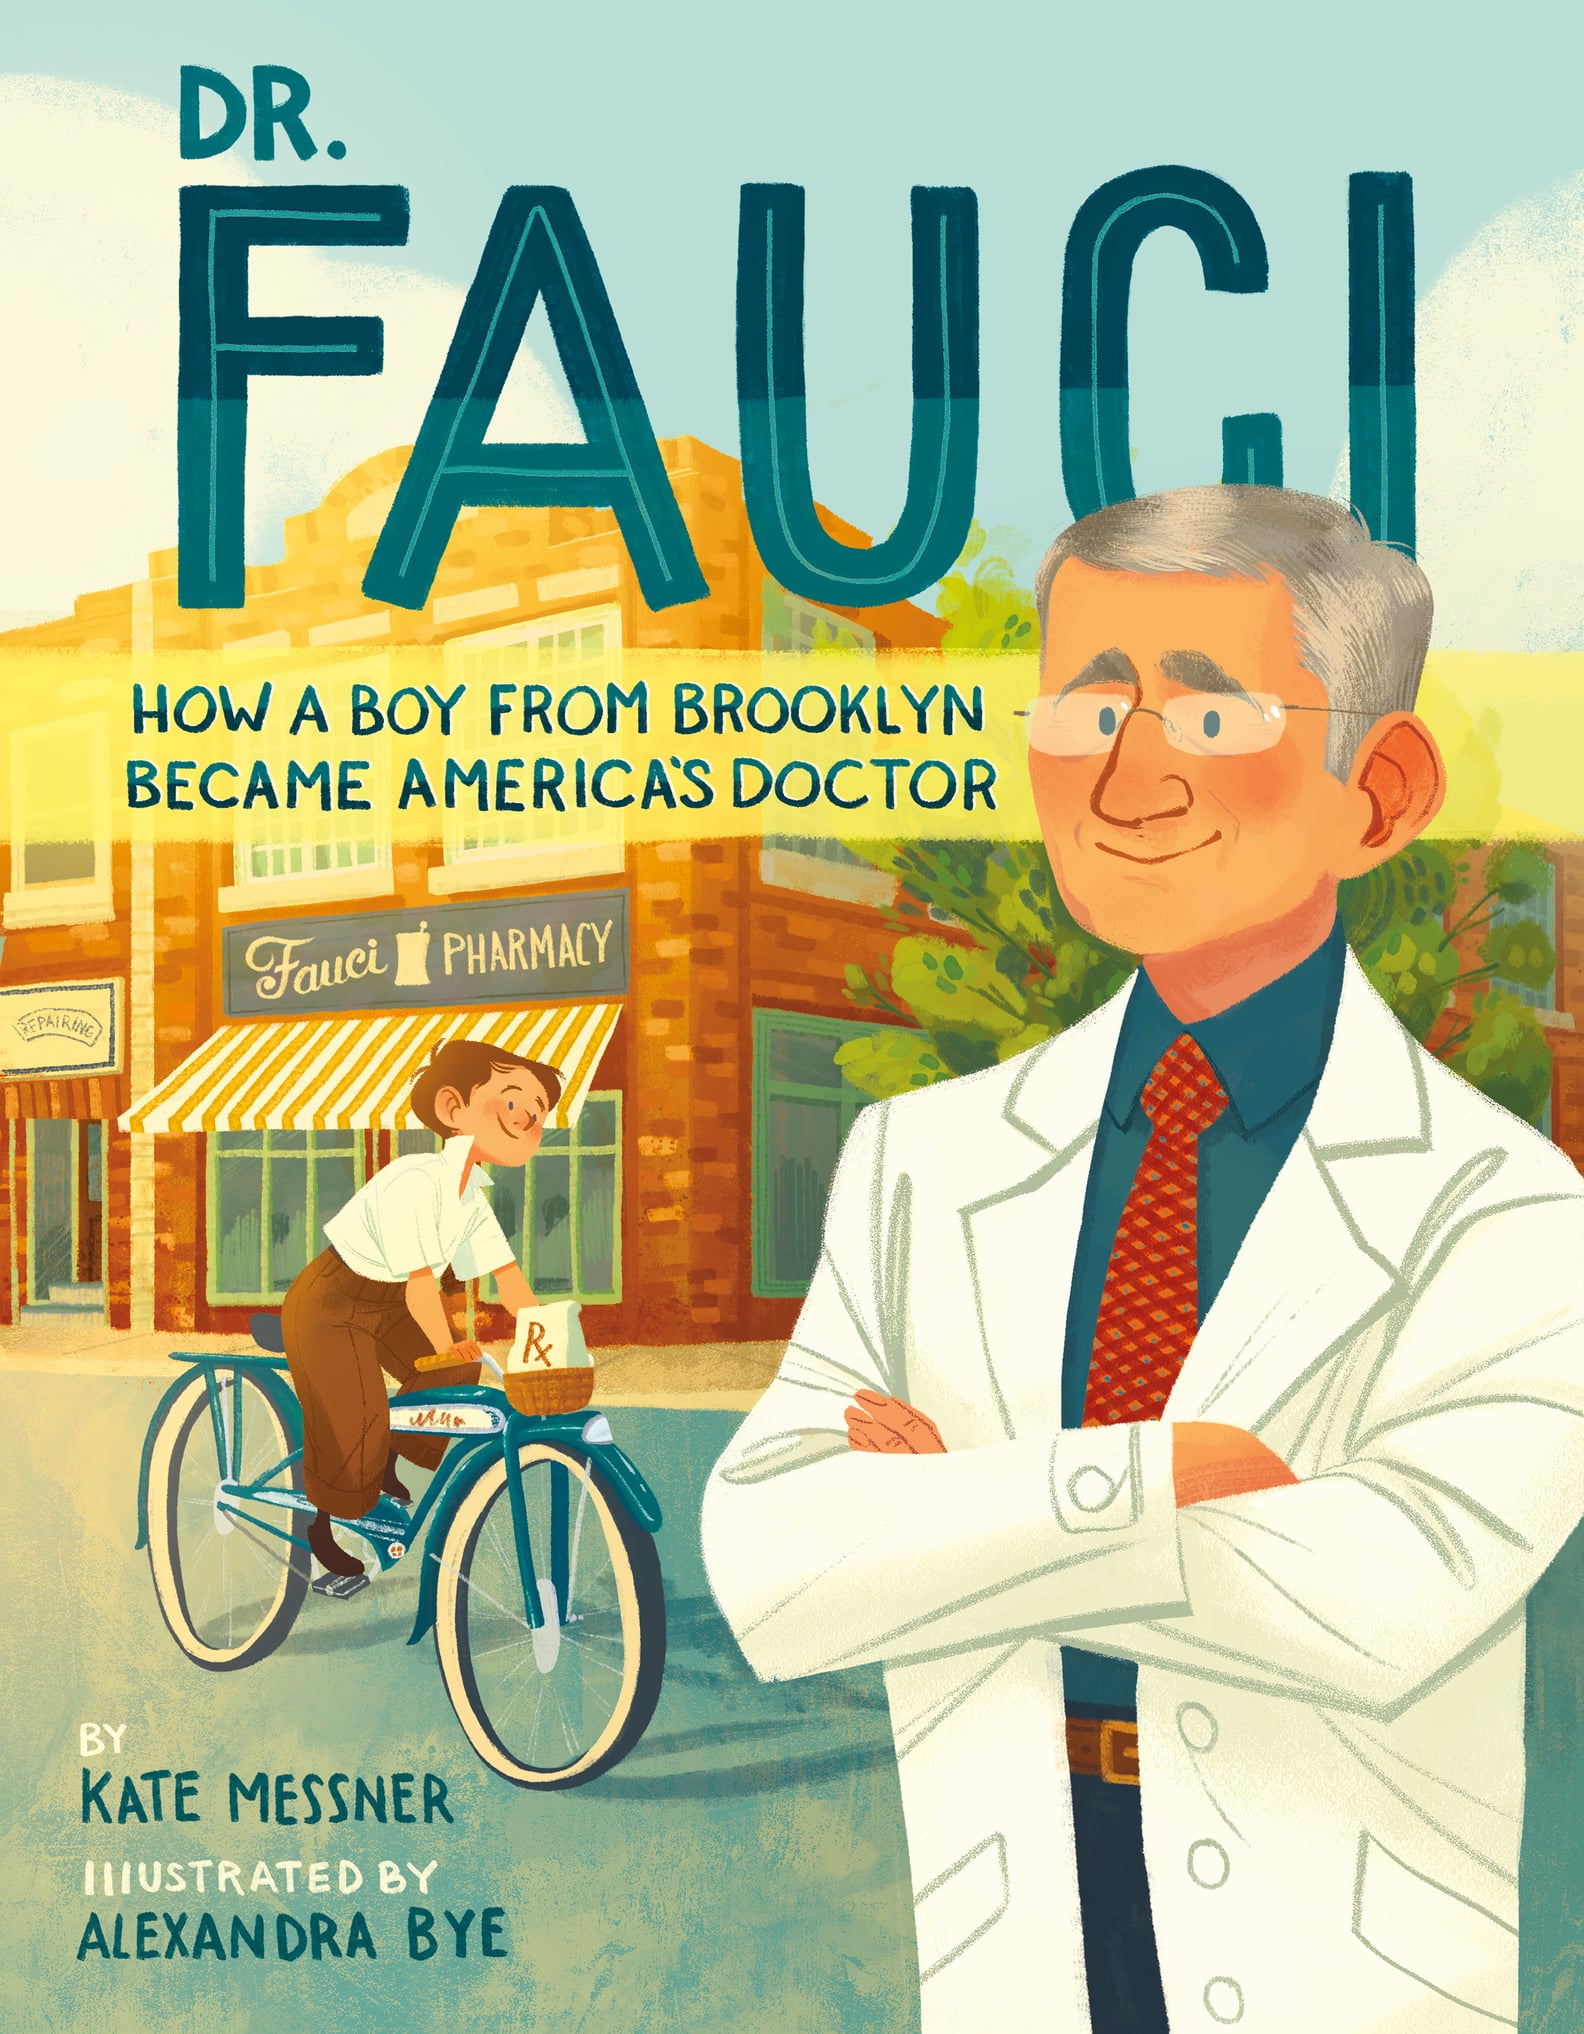 Dr. Fauci PictureBook Biography For Kids Comes Out in June POPSUGAR